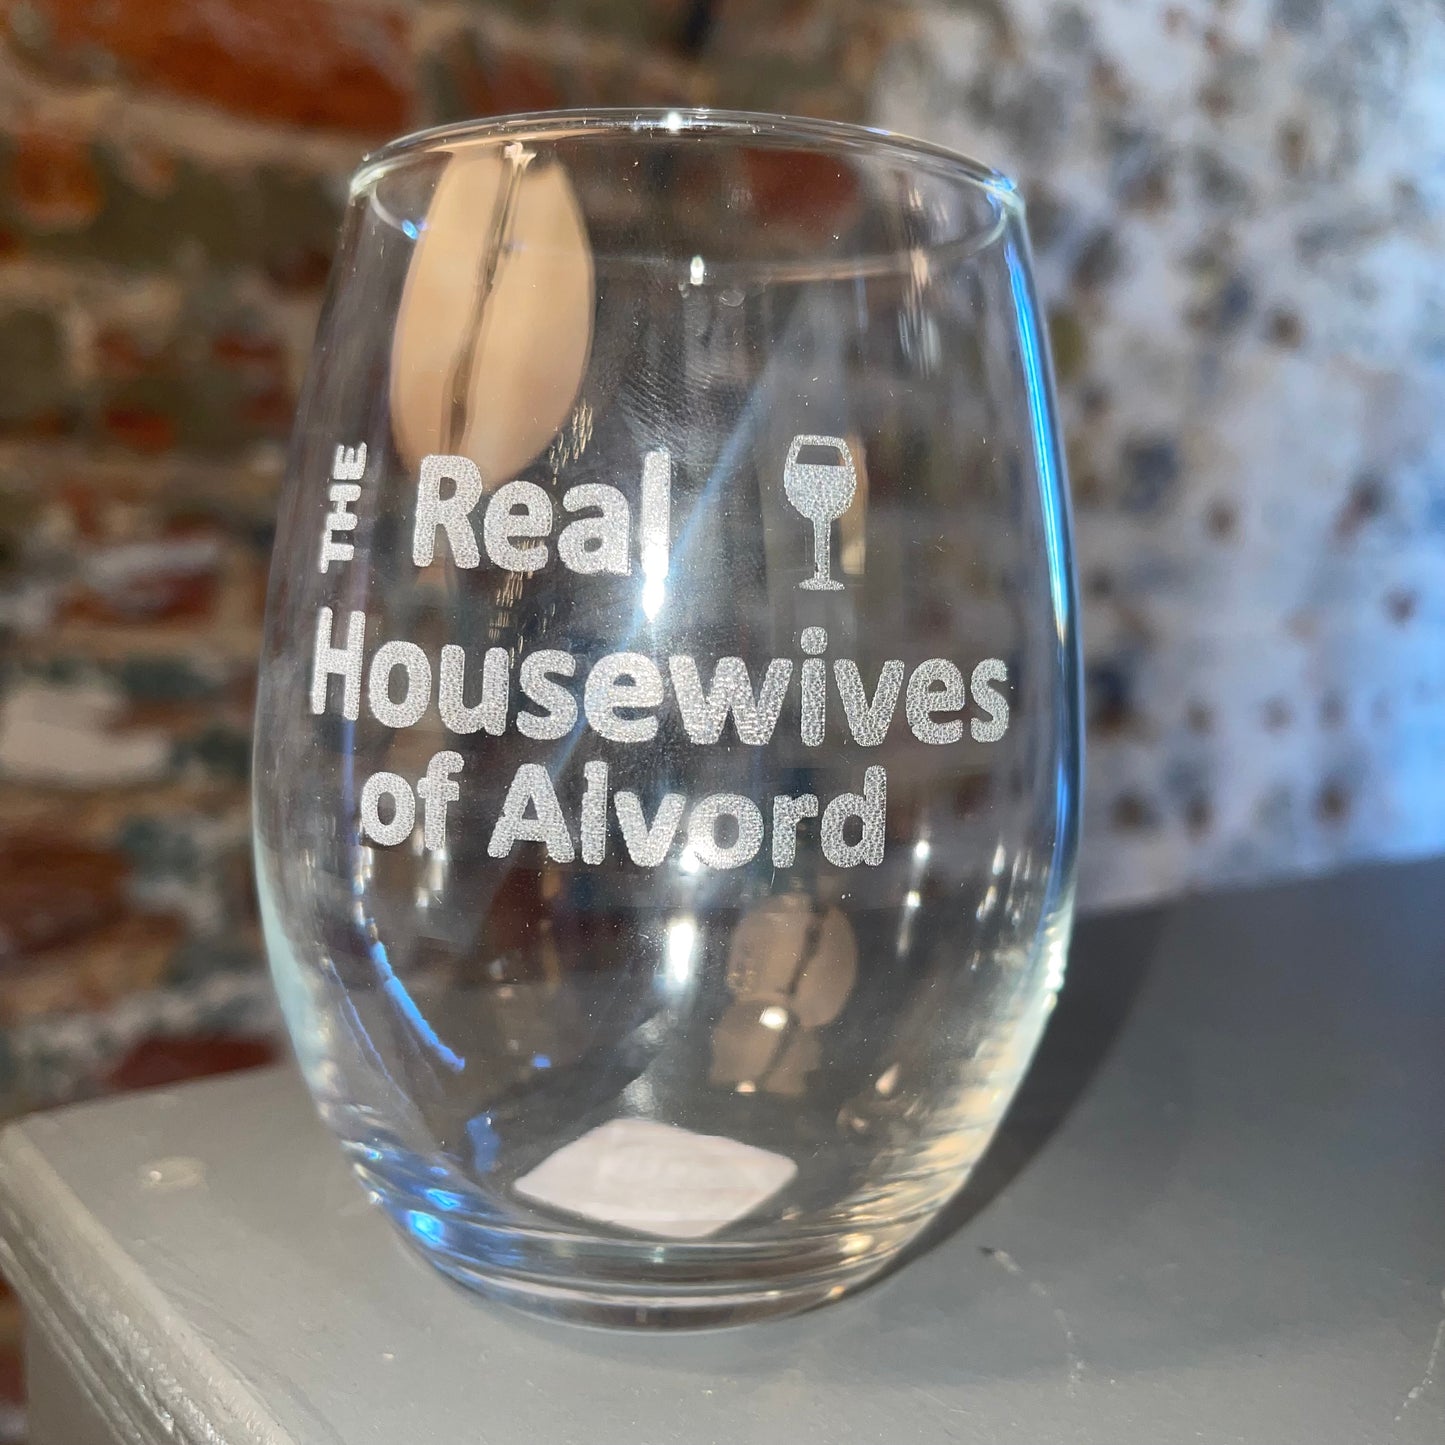 THE REAL HOUSEWIVES